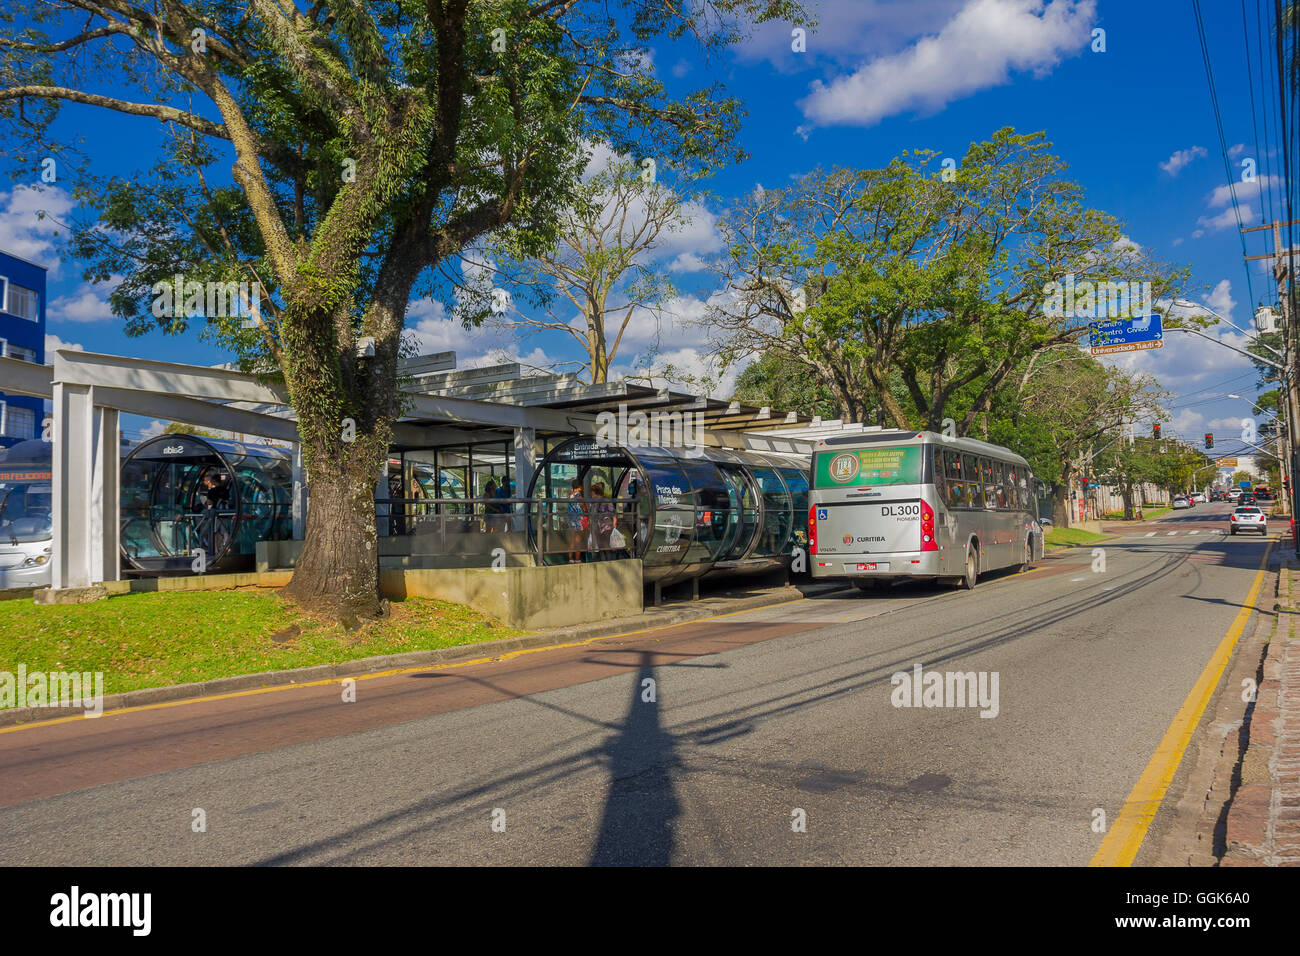 CURITIBA ,BRAZIL - MAY 12, 2016: passengers getting on a public bus, big tree located next to the bus station Stock Photo